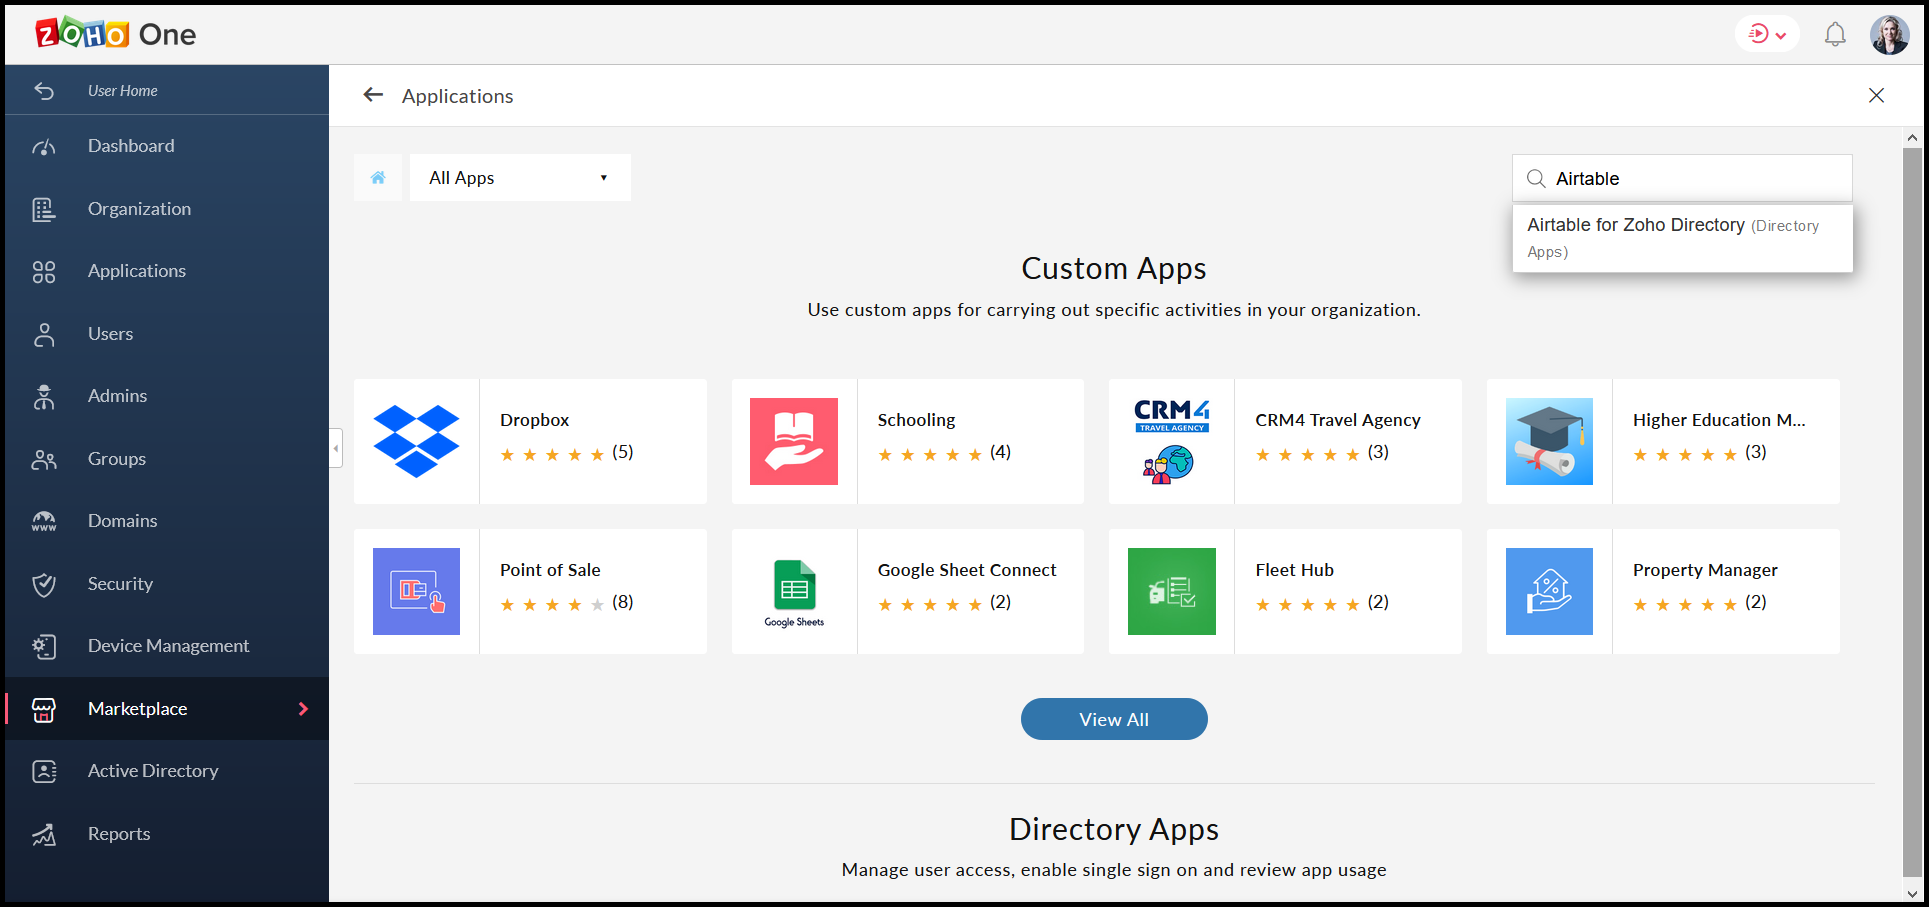 Airtable in Zoho One's Marketplace